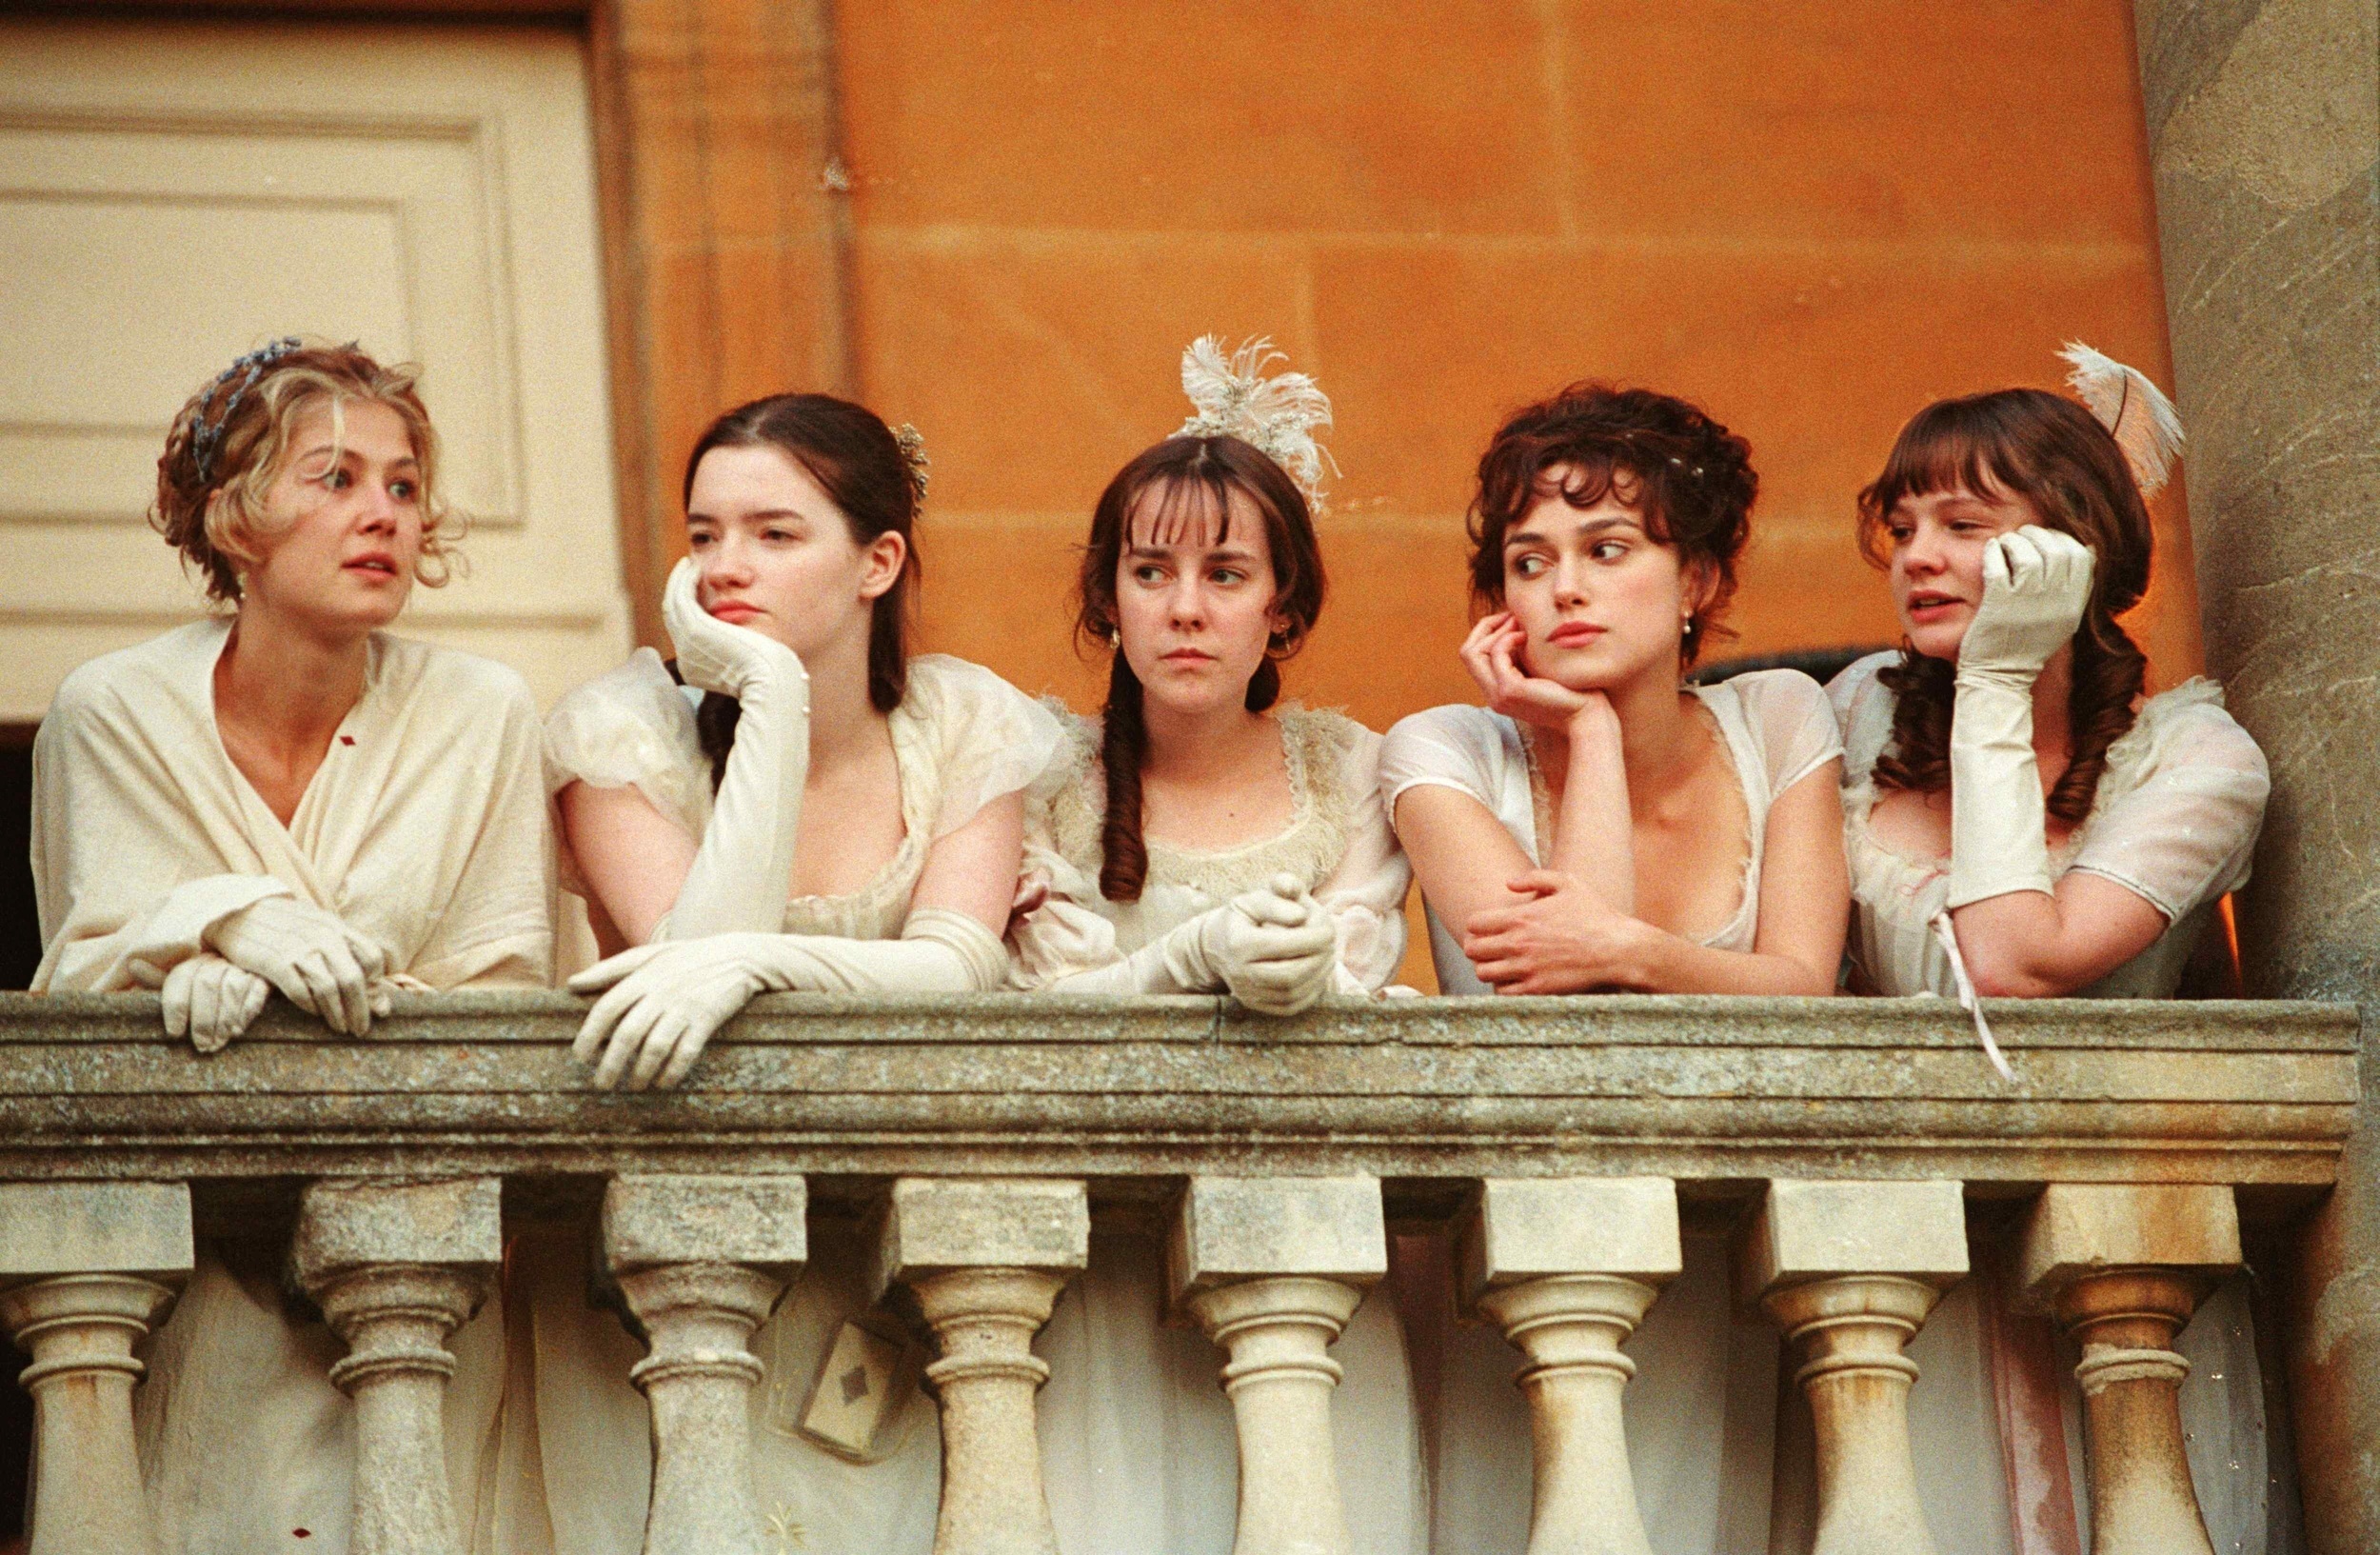 <p>Instead of an obscure rom-com, go for one of the most well-known romance films of all time and have a <em>Pride & Prejudice</em>-themed bachelorette party. You have instant inspo for outfits, decor, food, and more. It might be best for a night in, but that’ll make it all the more special and intimate. </p><p>You may also like: <a href='https://www.yardbarker.com/lifestyle/articles/make_breakfast_with_these_20_mouth_watering_slow_cooker_recipes_032124/s1__25737068'>Make breakfast with these 20 mouth-watering slow-cooker recipes</a></p>